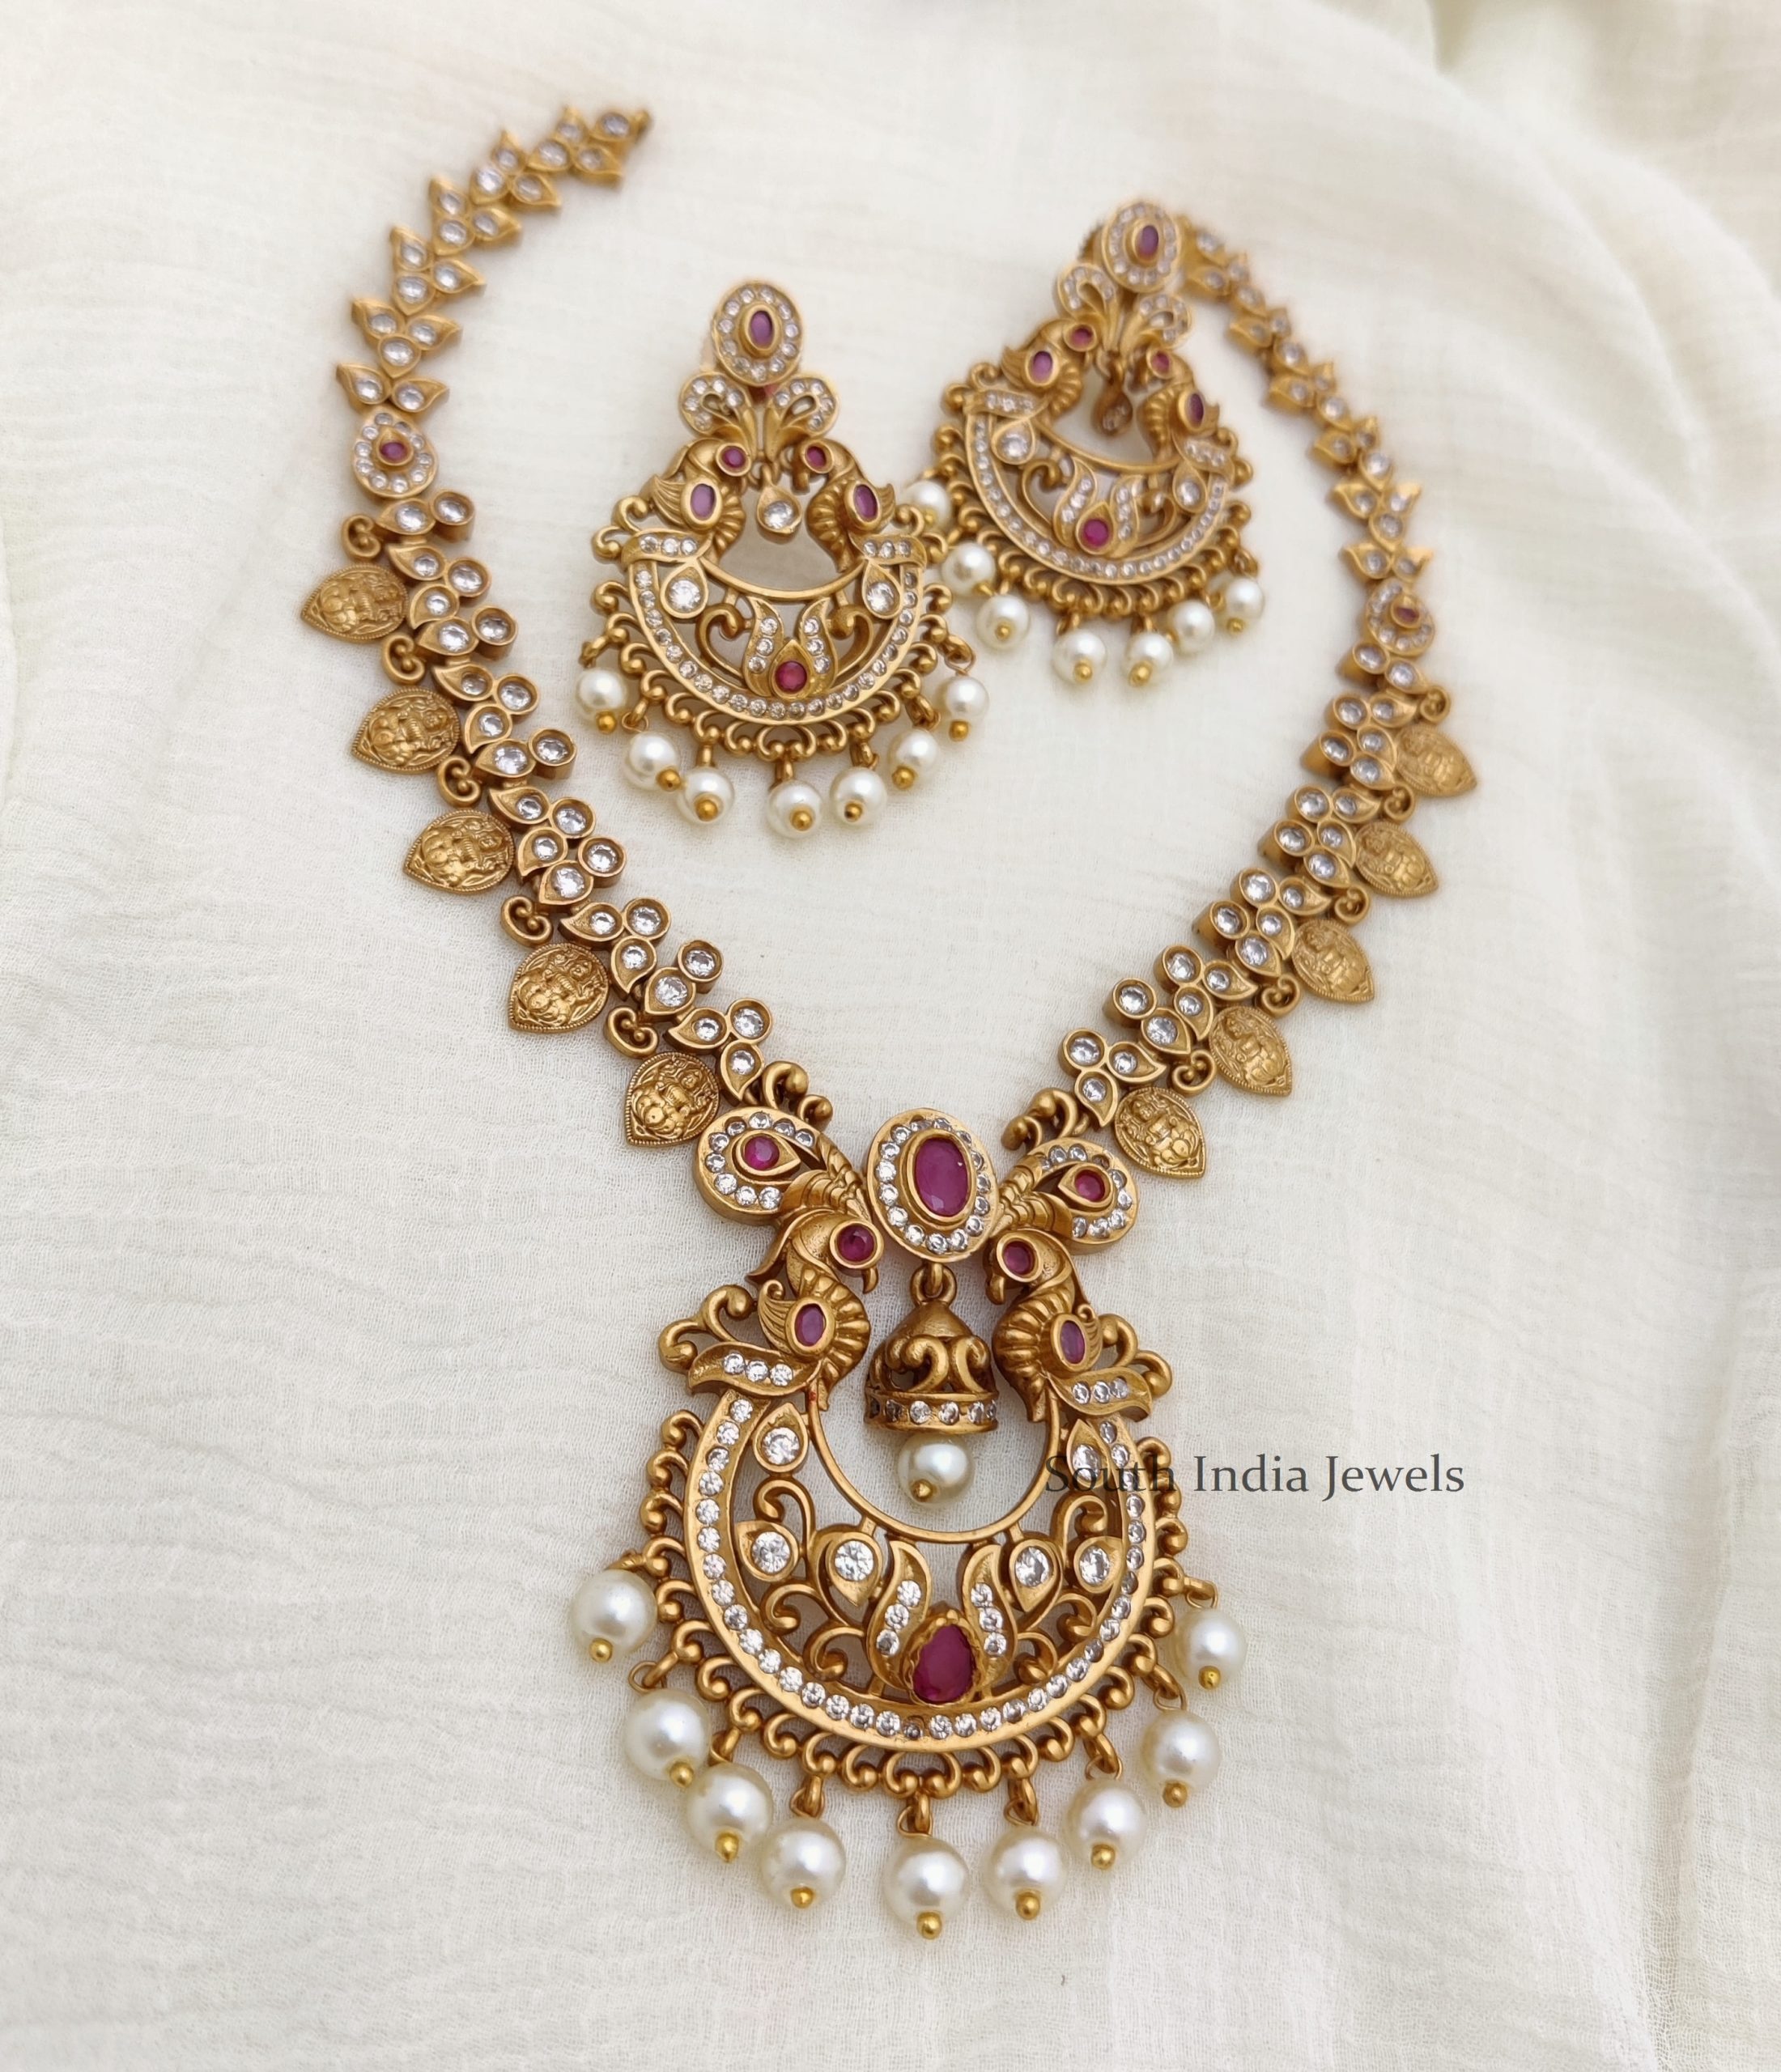 Beautiful Peacock Necklace with Pearls -01